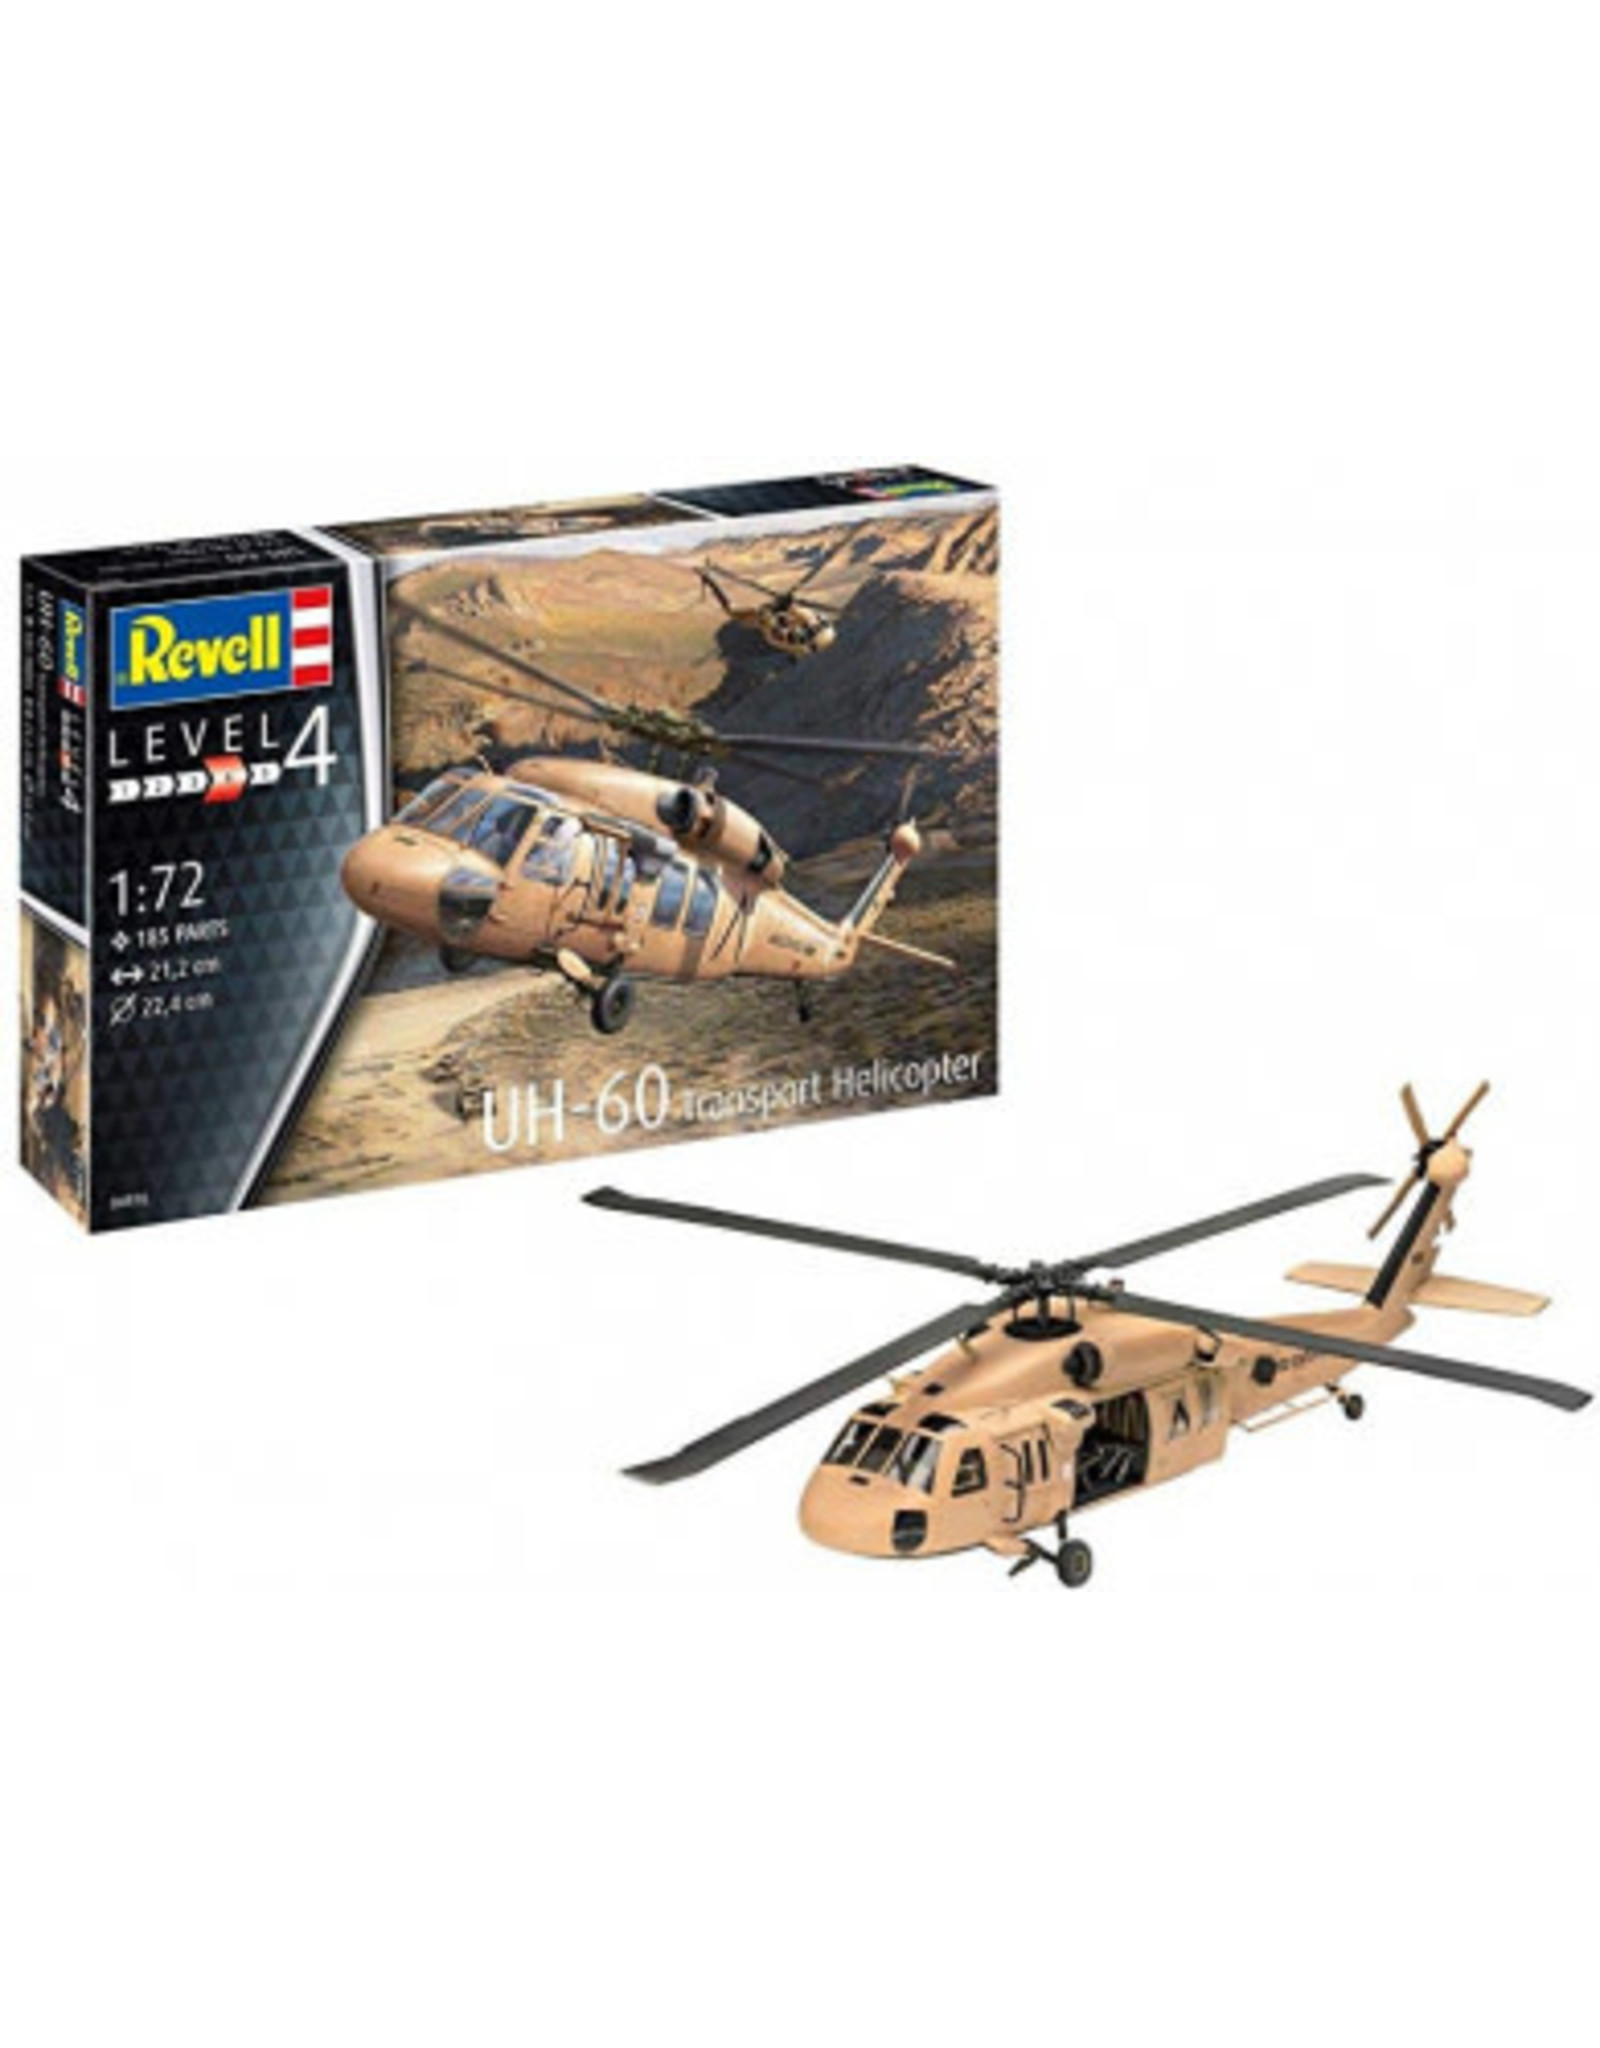 Revell UH-60 Transport Helicopter - 1/72